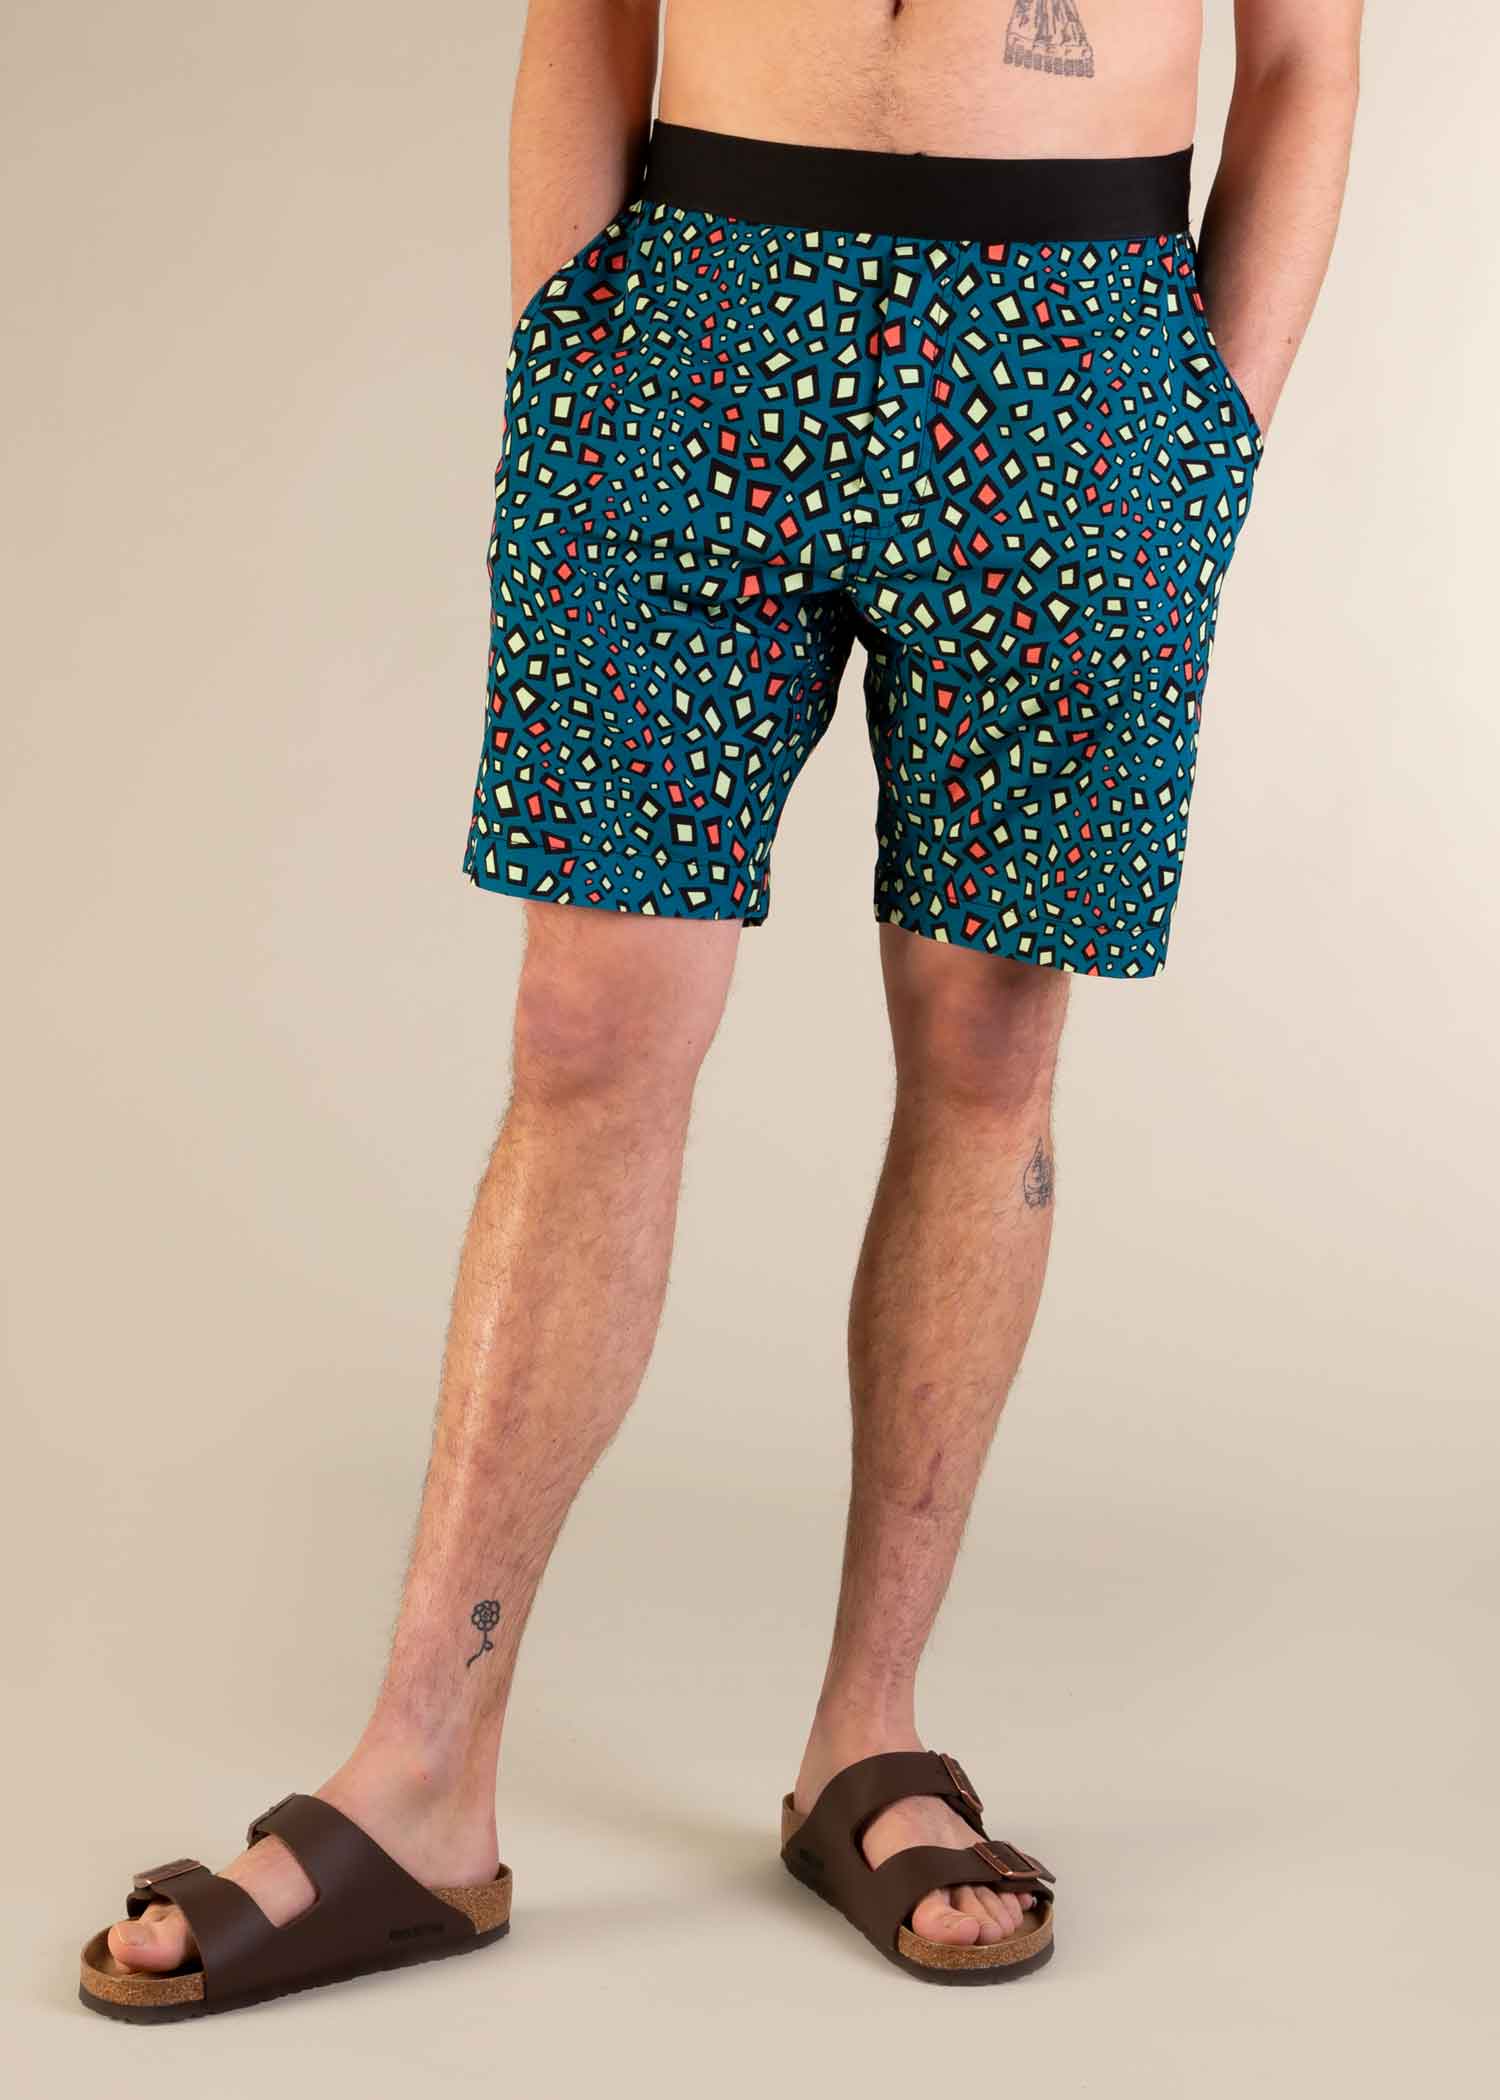 3RD ROCK Sustainable Acitvewear adventure shorts - Kai is 6ft 1" with a 32" waist and is wearing a 32. M